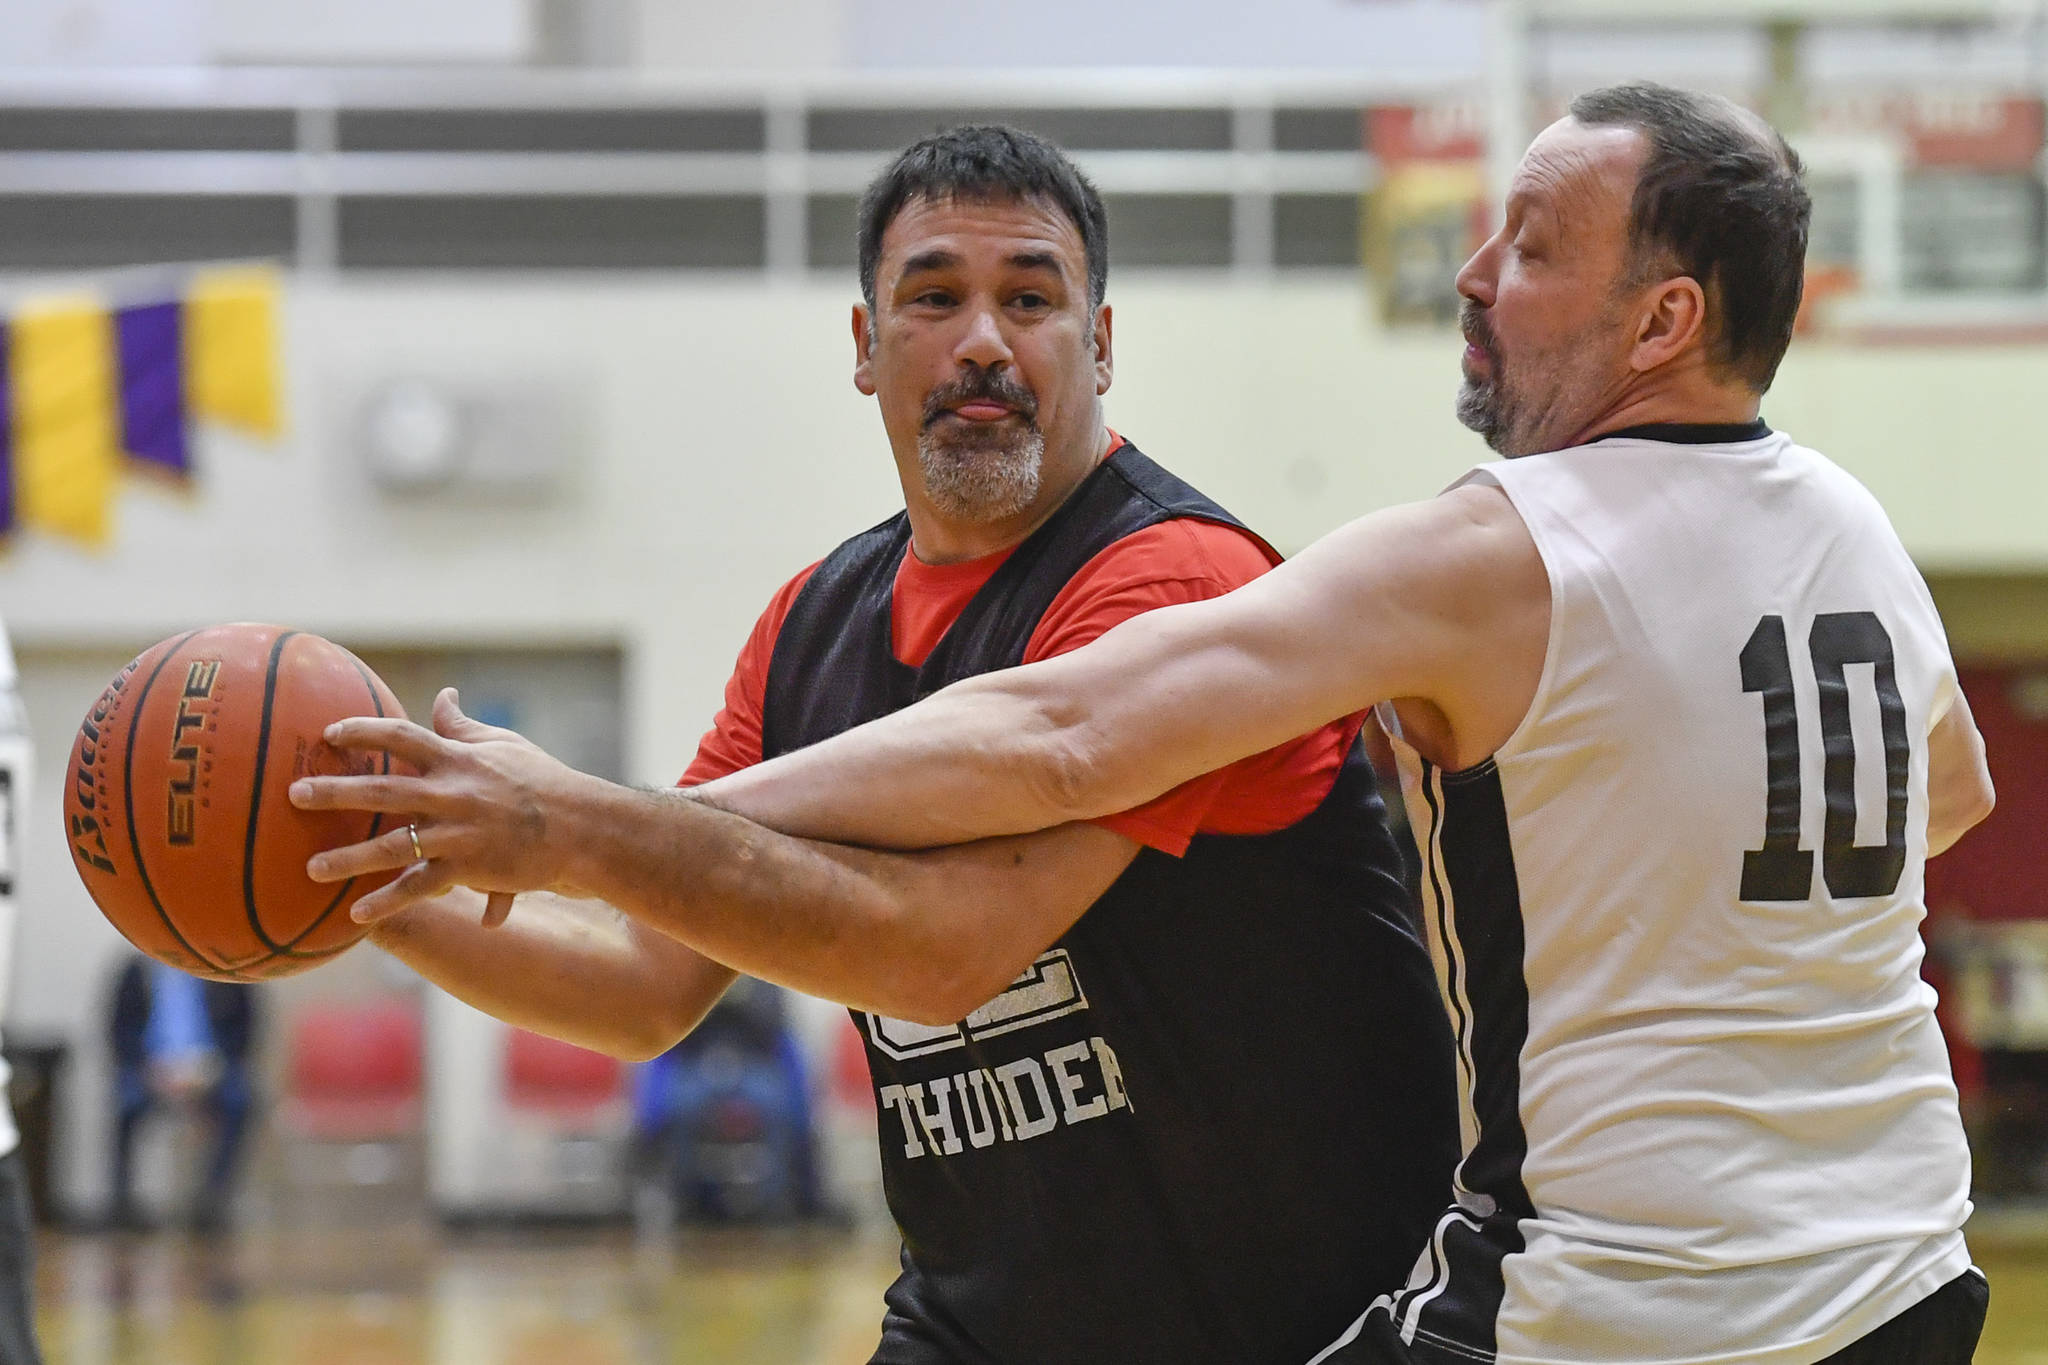 Klukwan’s Neil Erickson, left, is closely guarded by Yakutat’s Greg Indreland during their Masters bracket game at the Juneau Lions Club 73rd Annual Gold Medal Basketball Tournament at Juneau-Douglas High School on Friday, March 22, 2019. Klukwan won 63-58. (Michael Penn | Juneau Empire)